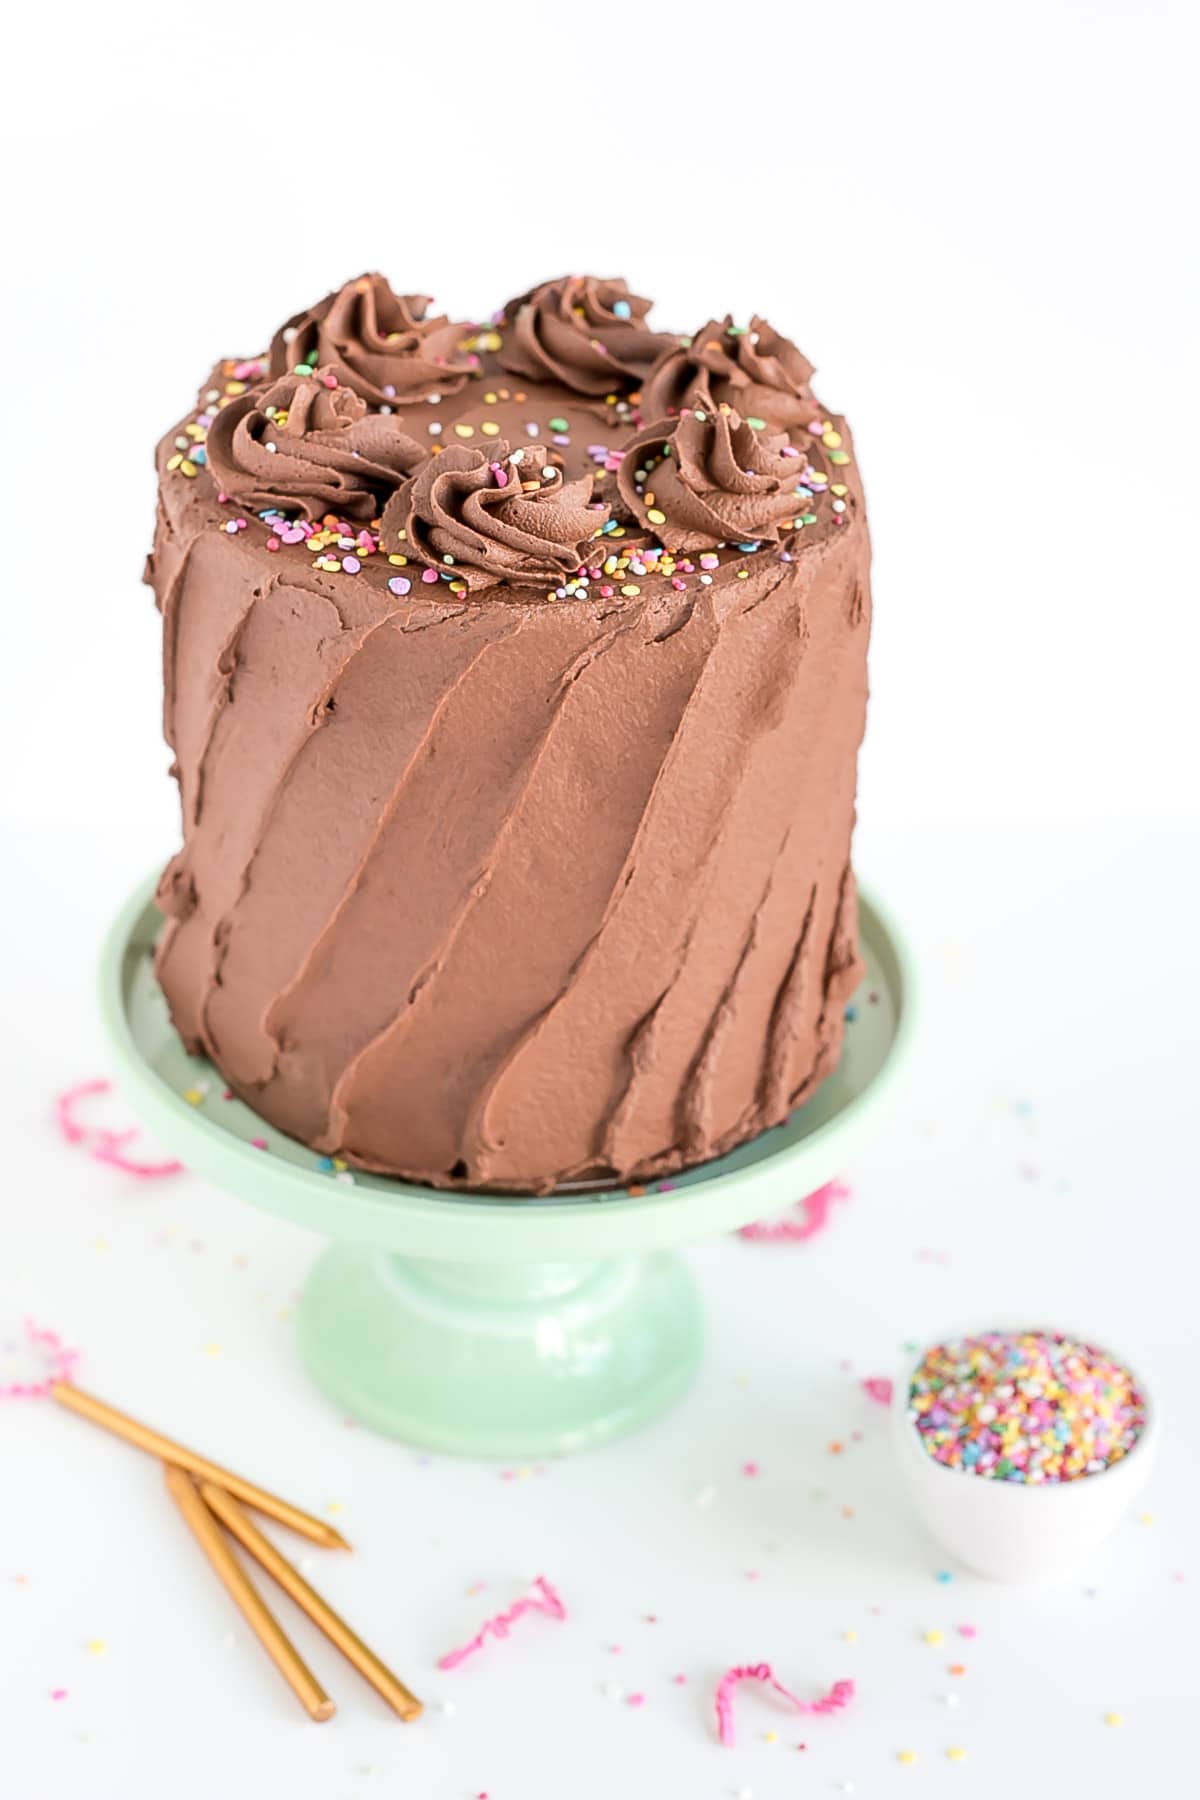 Cake with chocolate frosting and sprinkles.